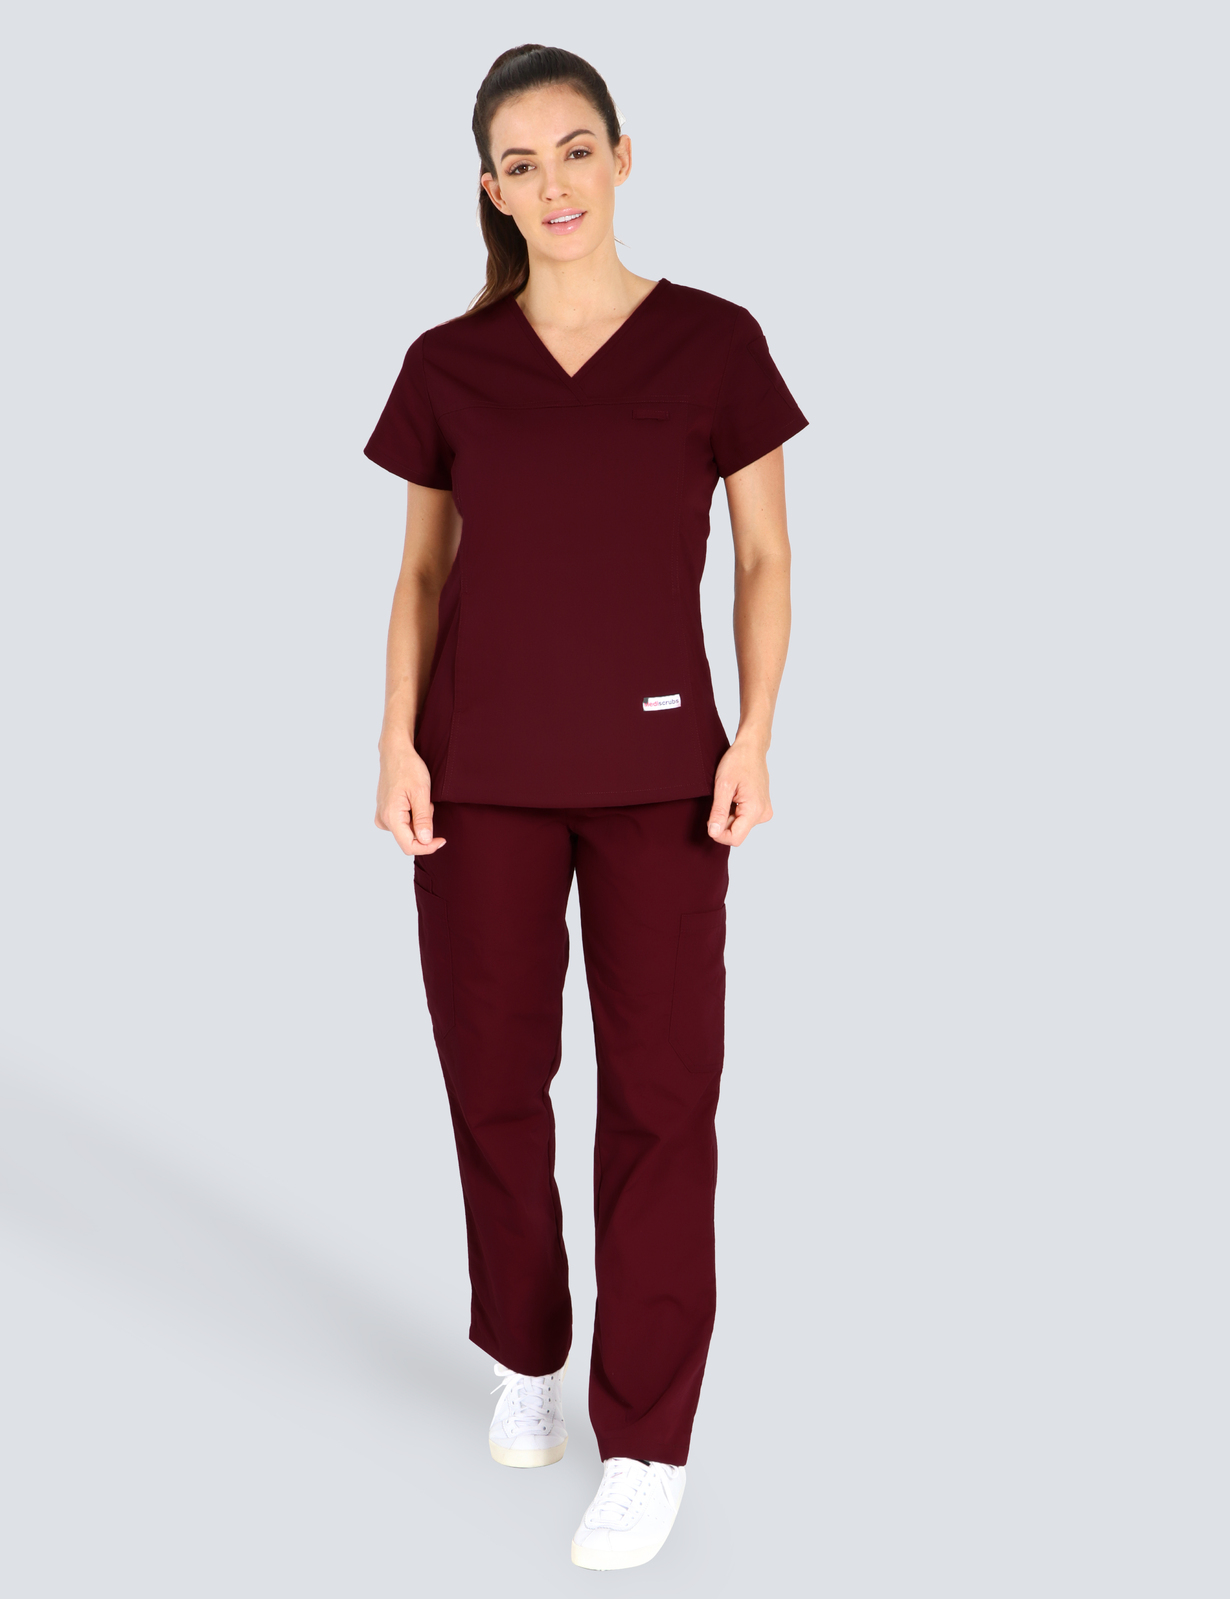 Redcliffe Hospital - ED RN (Women's Fit Solid Scrub Top and Cargo Pants in Burgundy incl Logos)